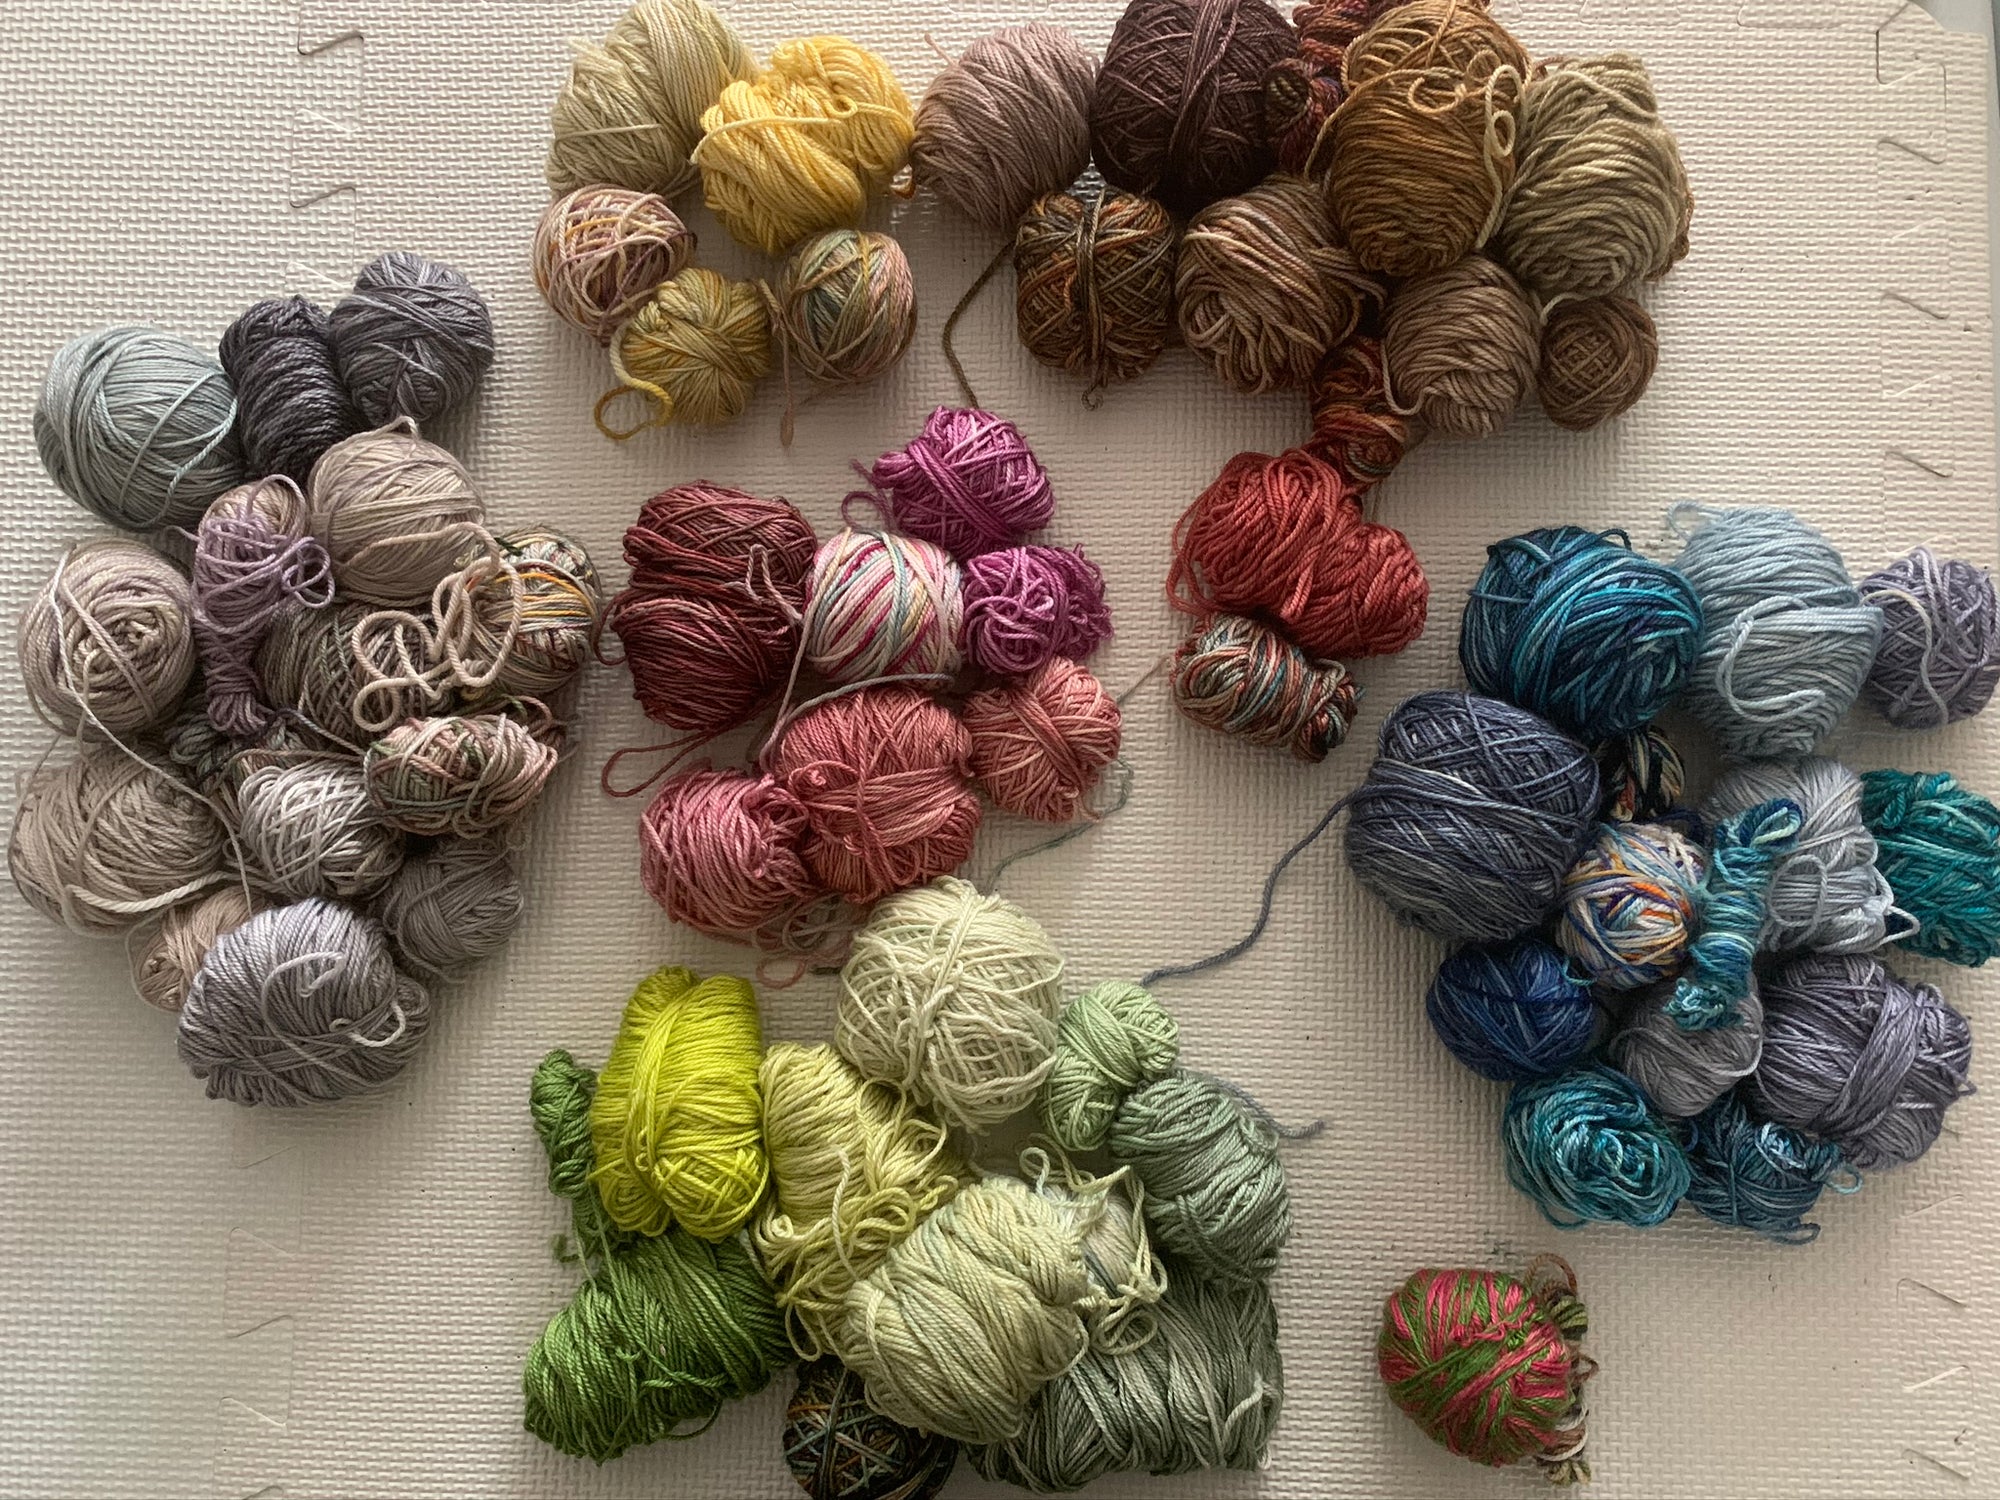 Getting to know Yarn weights